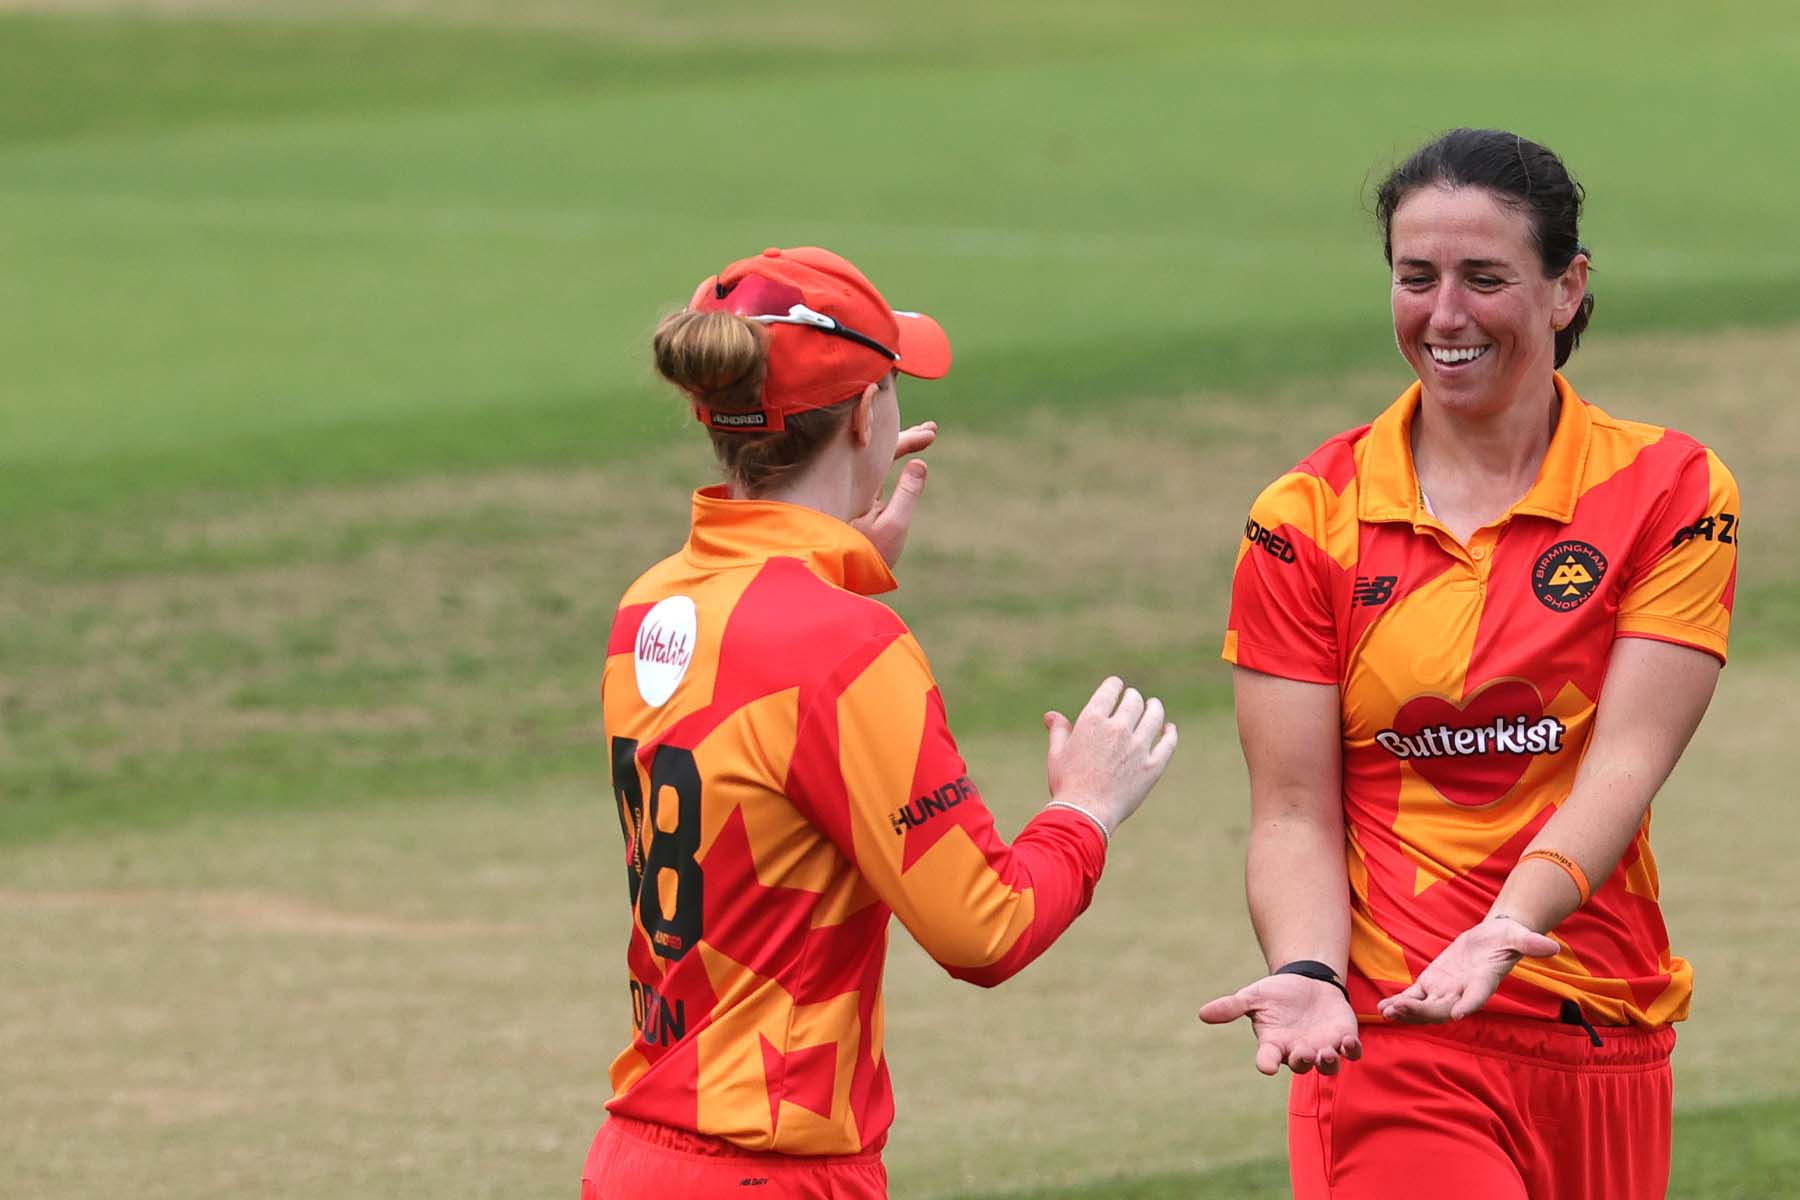 Elwiss joins ‘Women in Cricket’ Employee network - The PCA